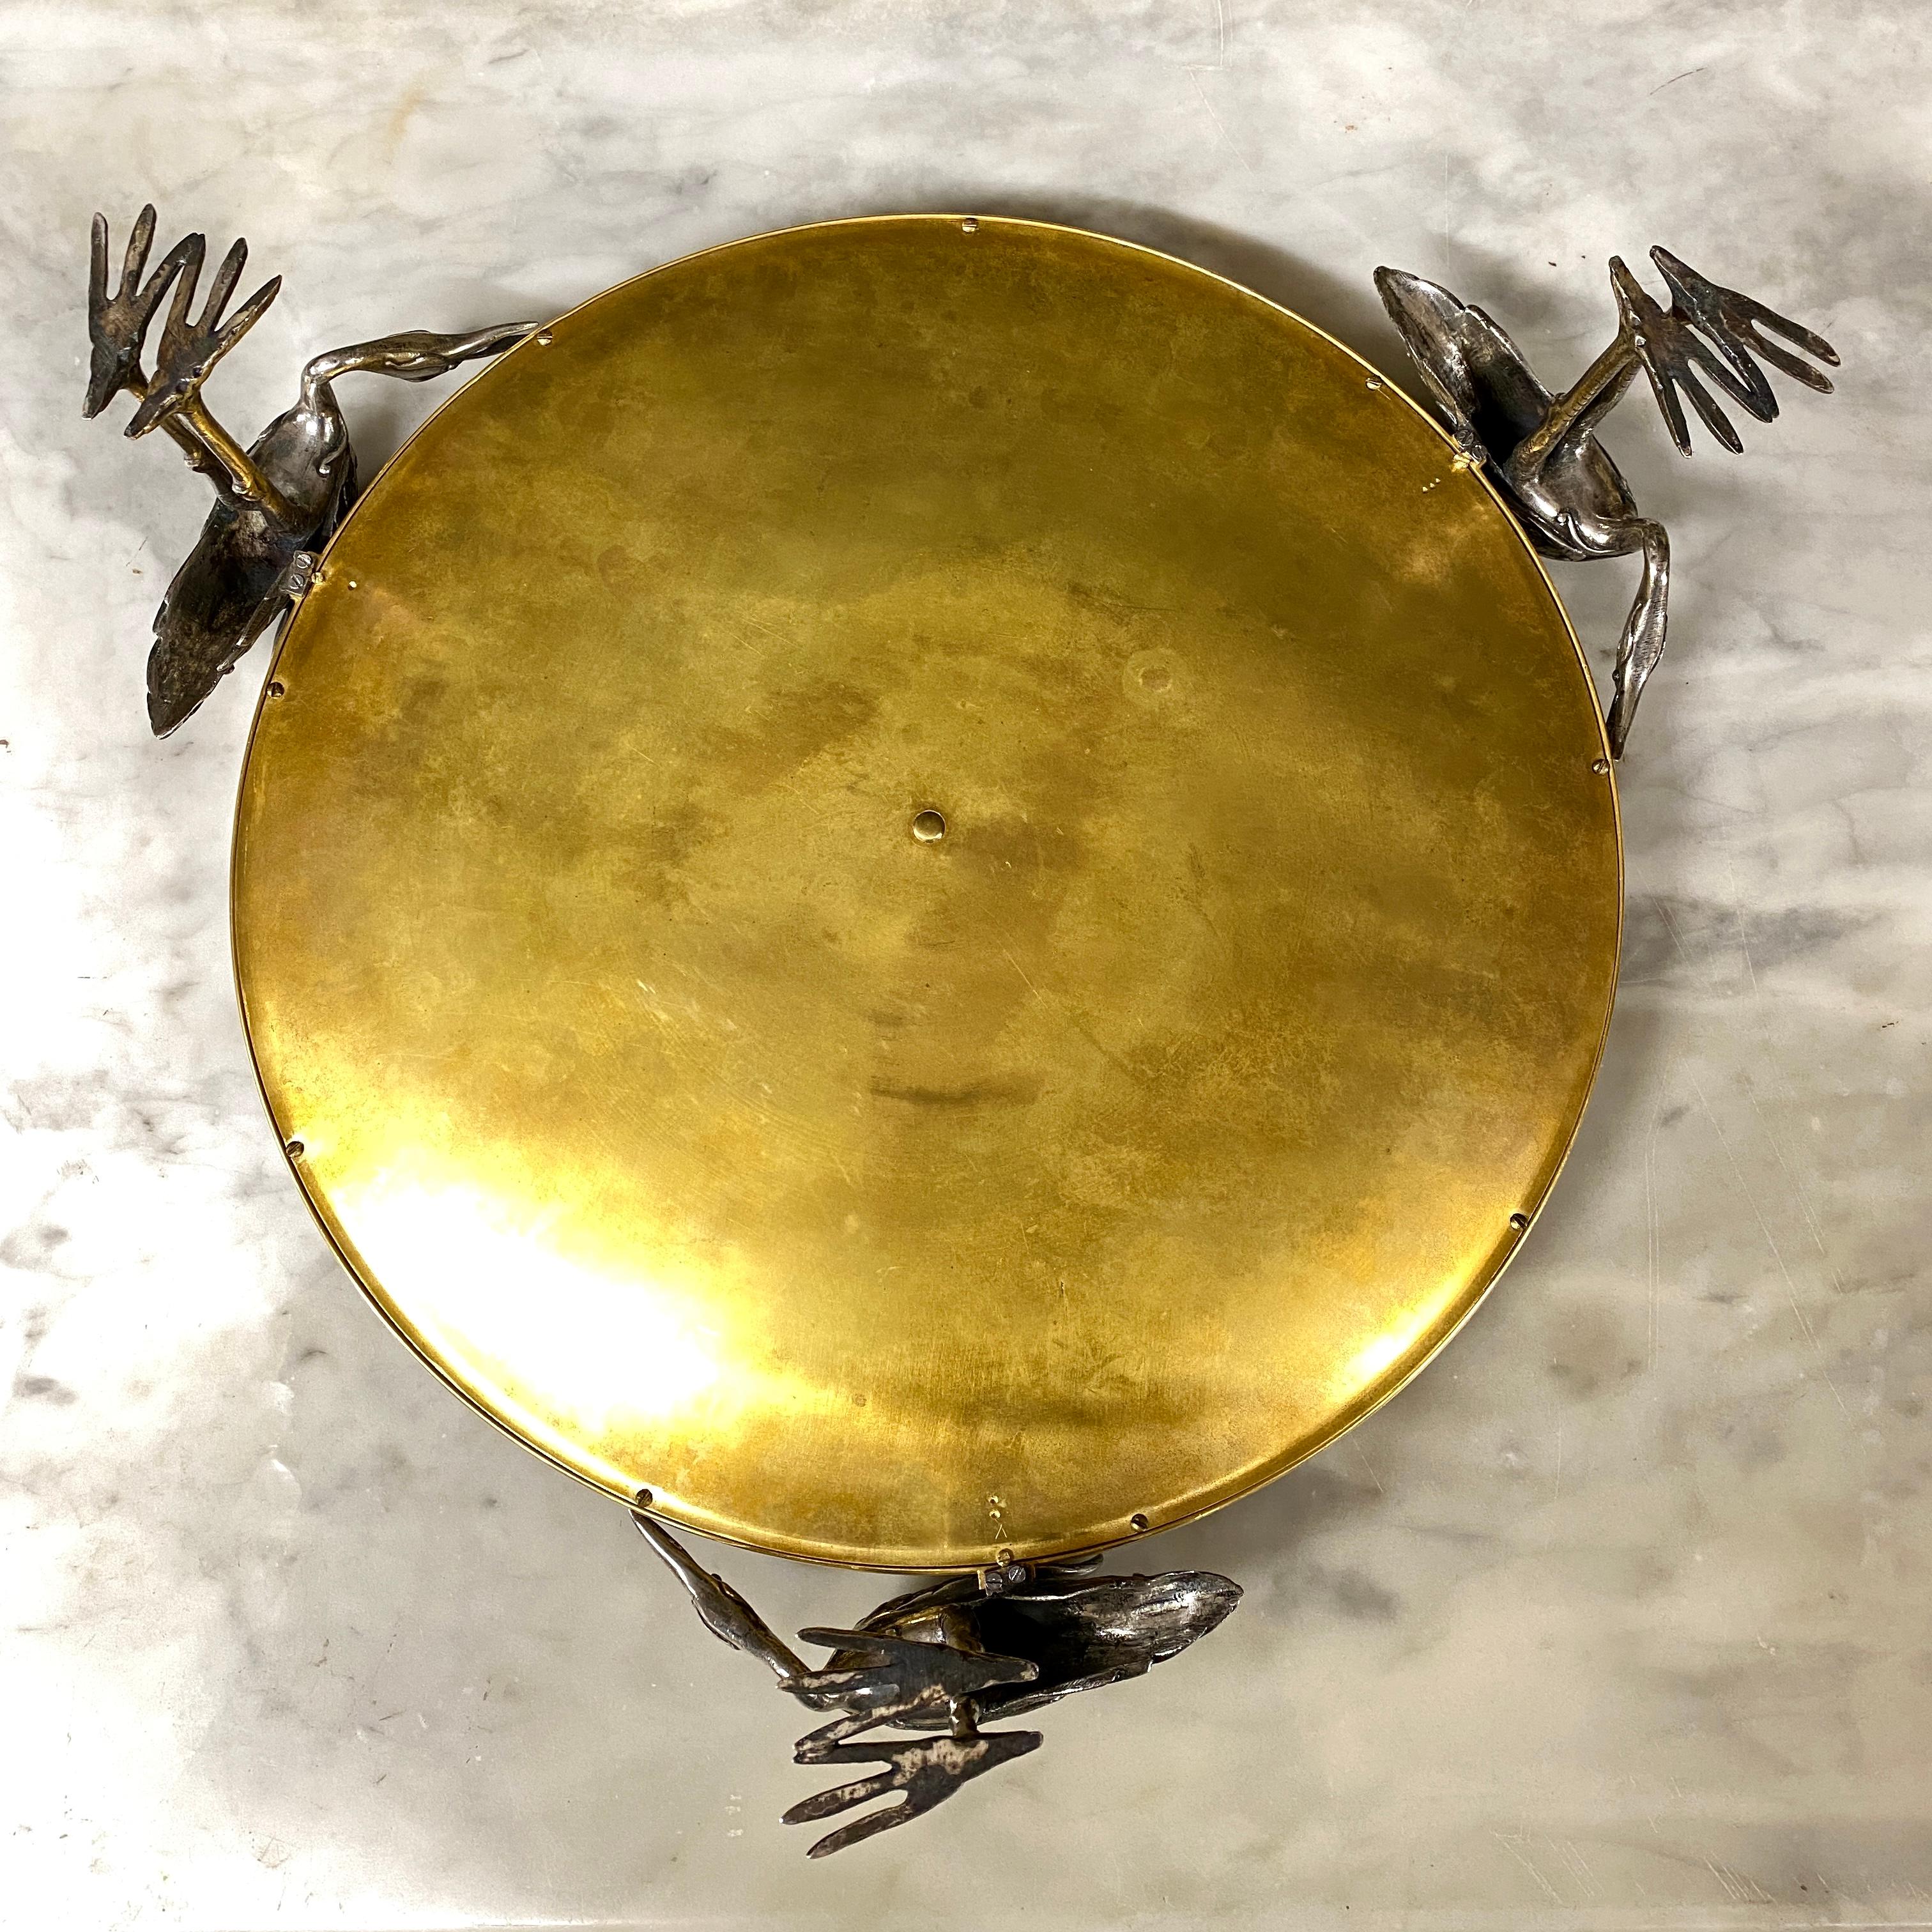 Large cup in gilded bronze and silvered bronze held by three storks forming the base. It is decorated with a central marquetry in ivory and precious wood (rosewood, rosewood) partitioned in chiseled brass. This decoration represents a pheasant